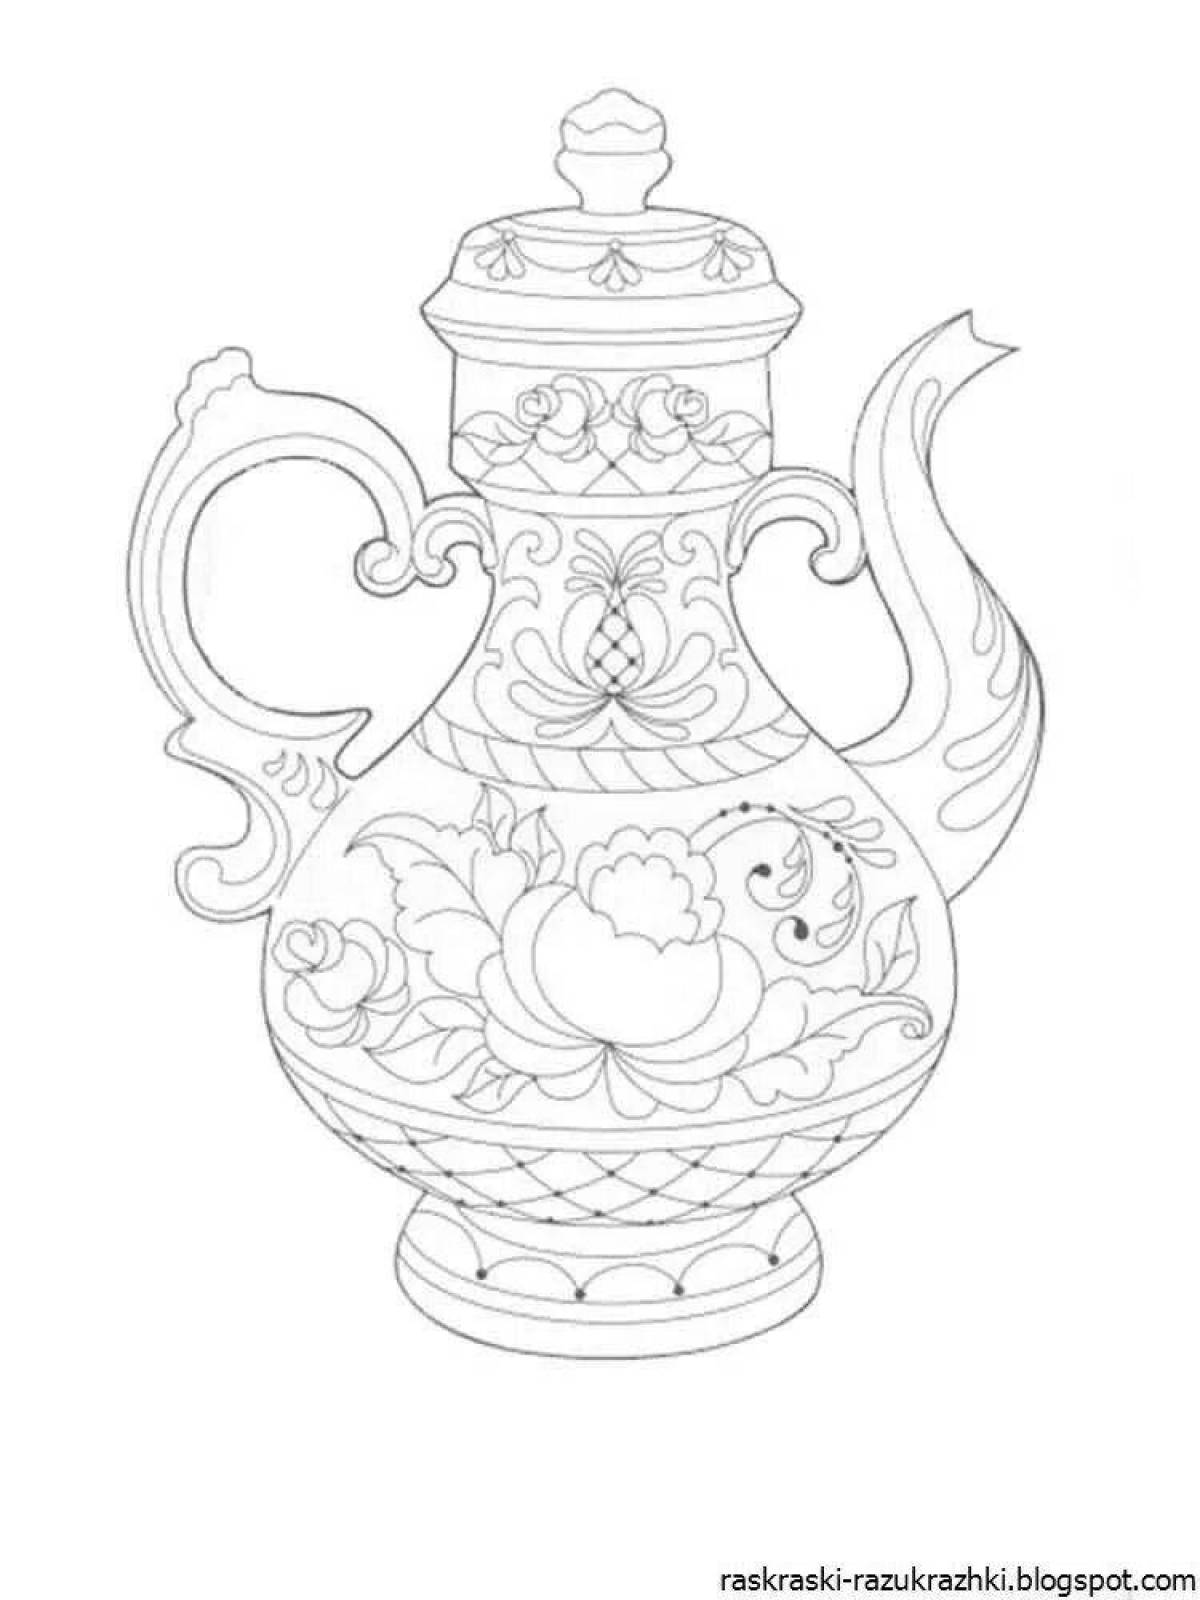 Coloring book shiny Gzhel plate